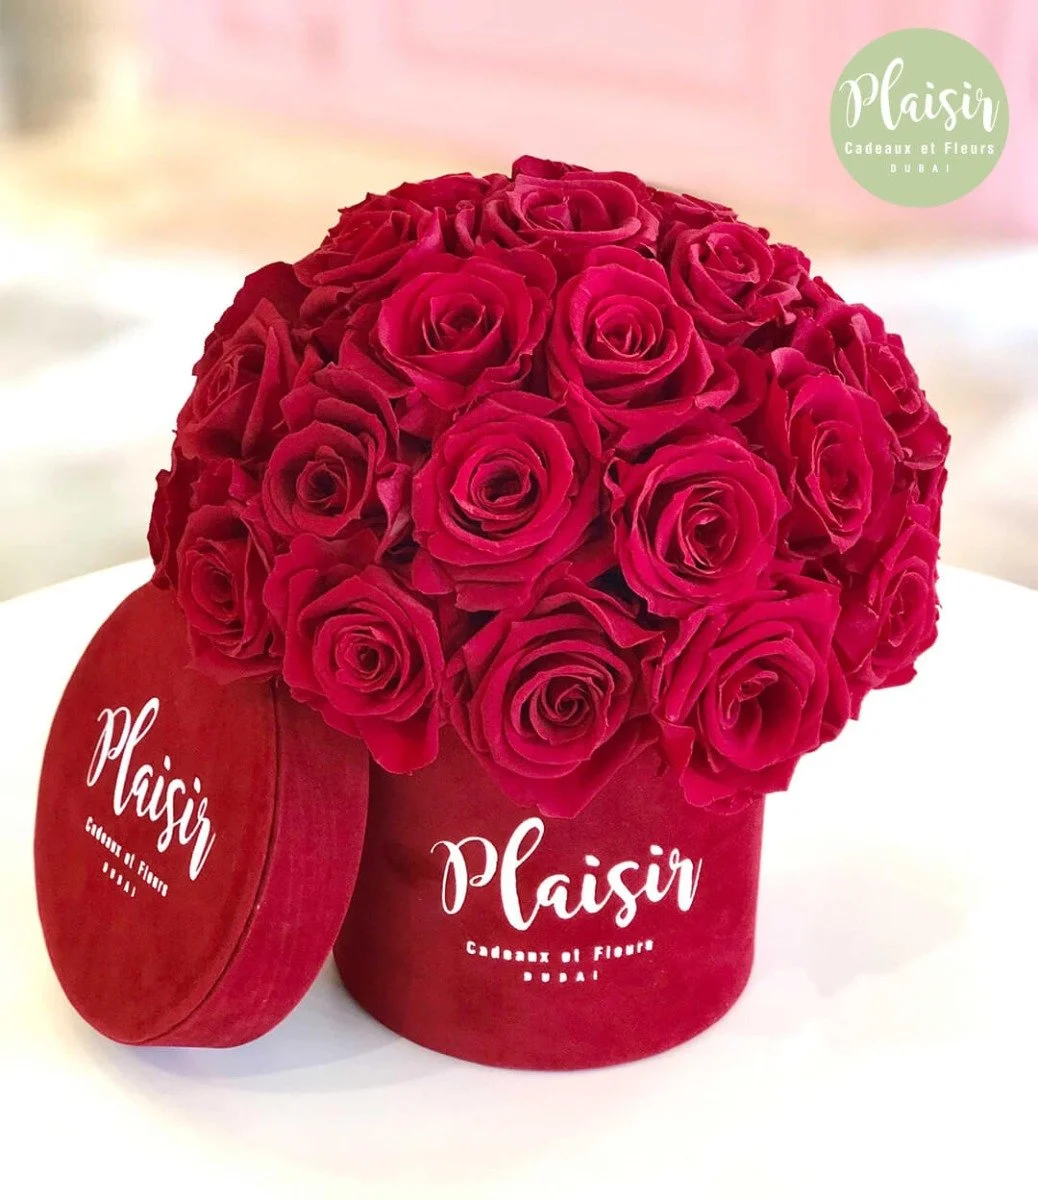 Infinity Red Rose Dome Round Box By Plaisir